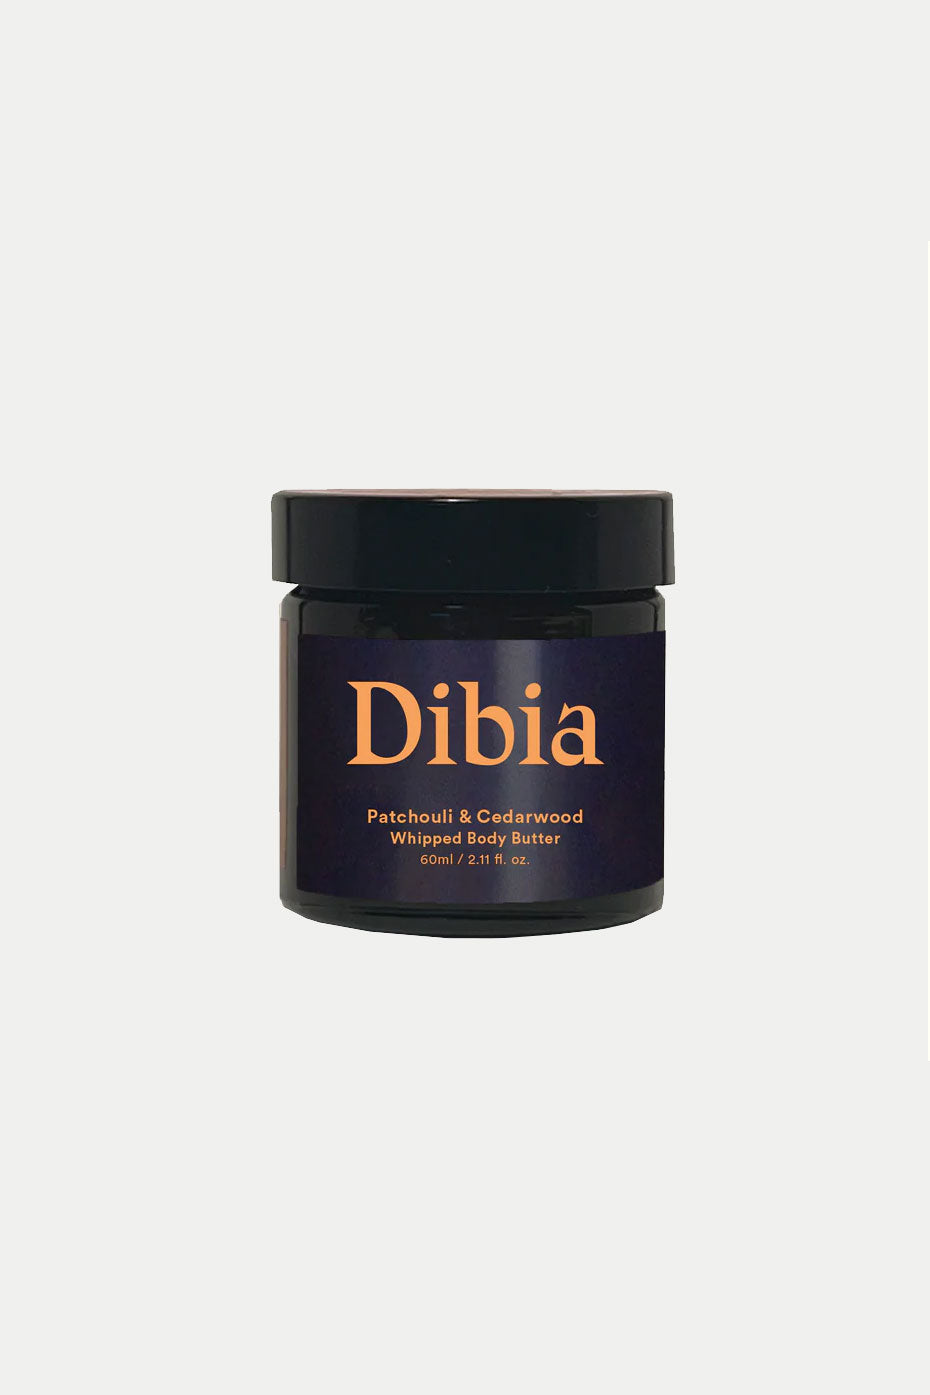 Dibia Patchouli & Cedarwood Whipped Body Butter 60ml